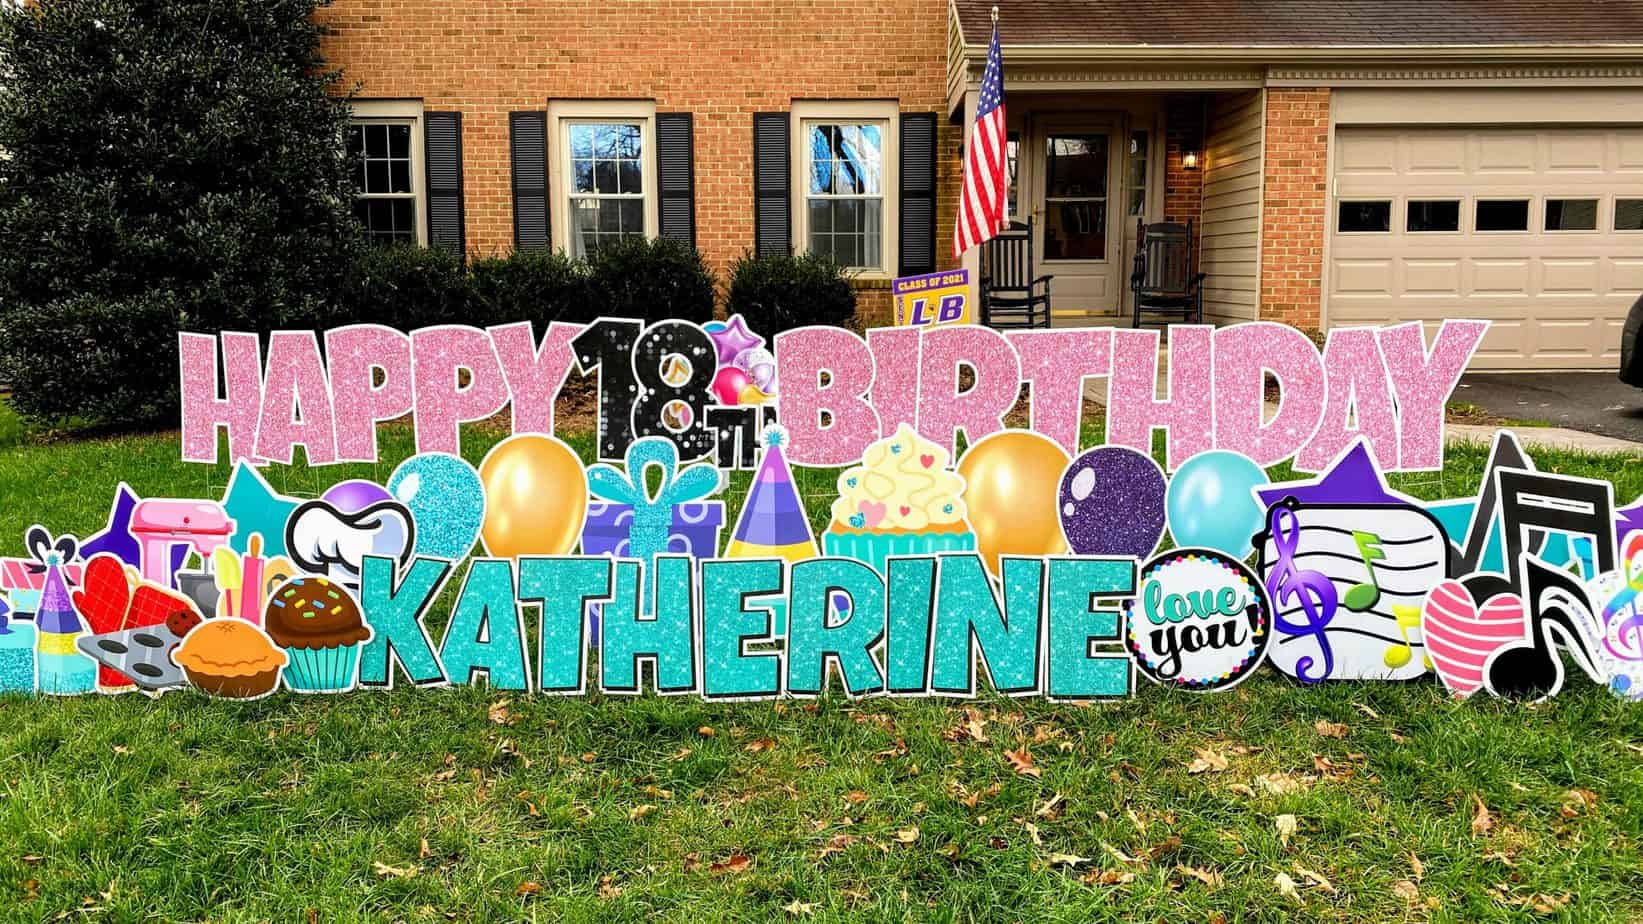 happy birthday yard sign for katherine in bowie, md